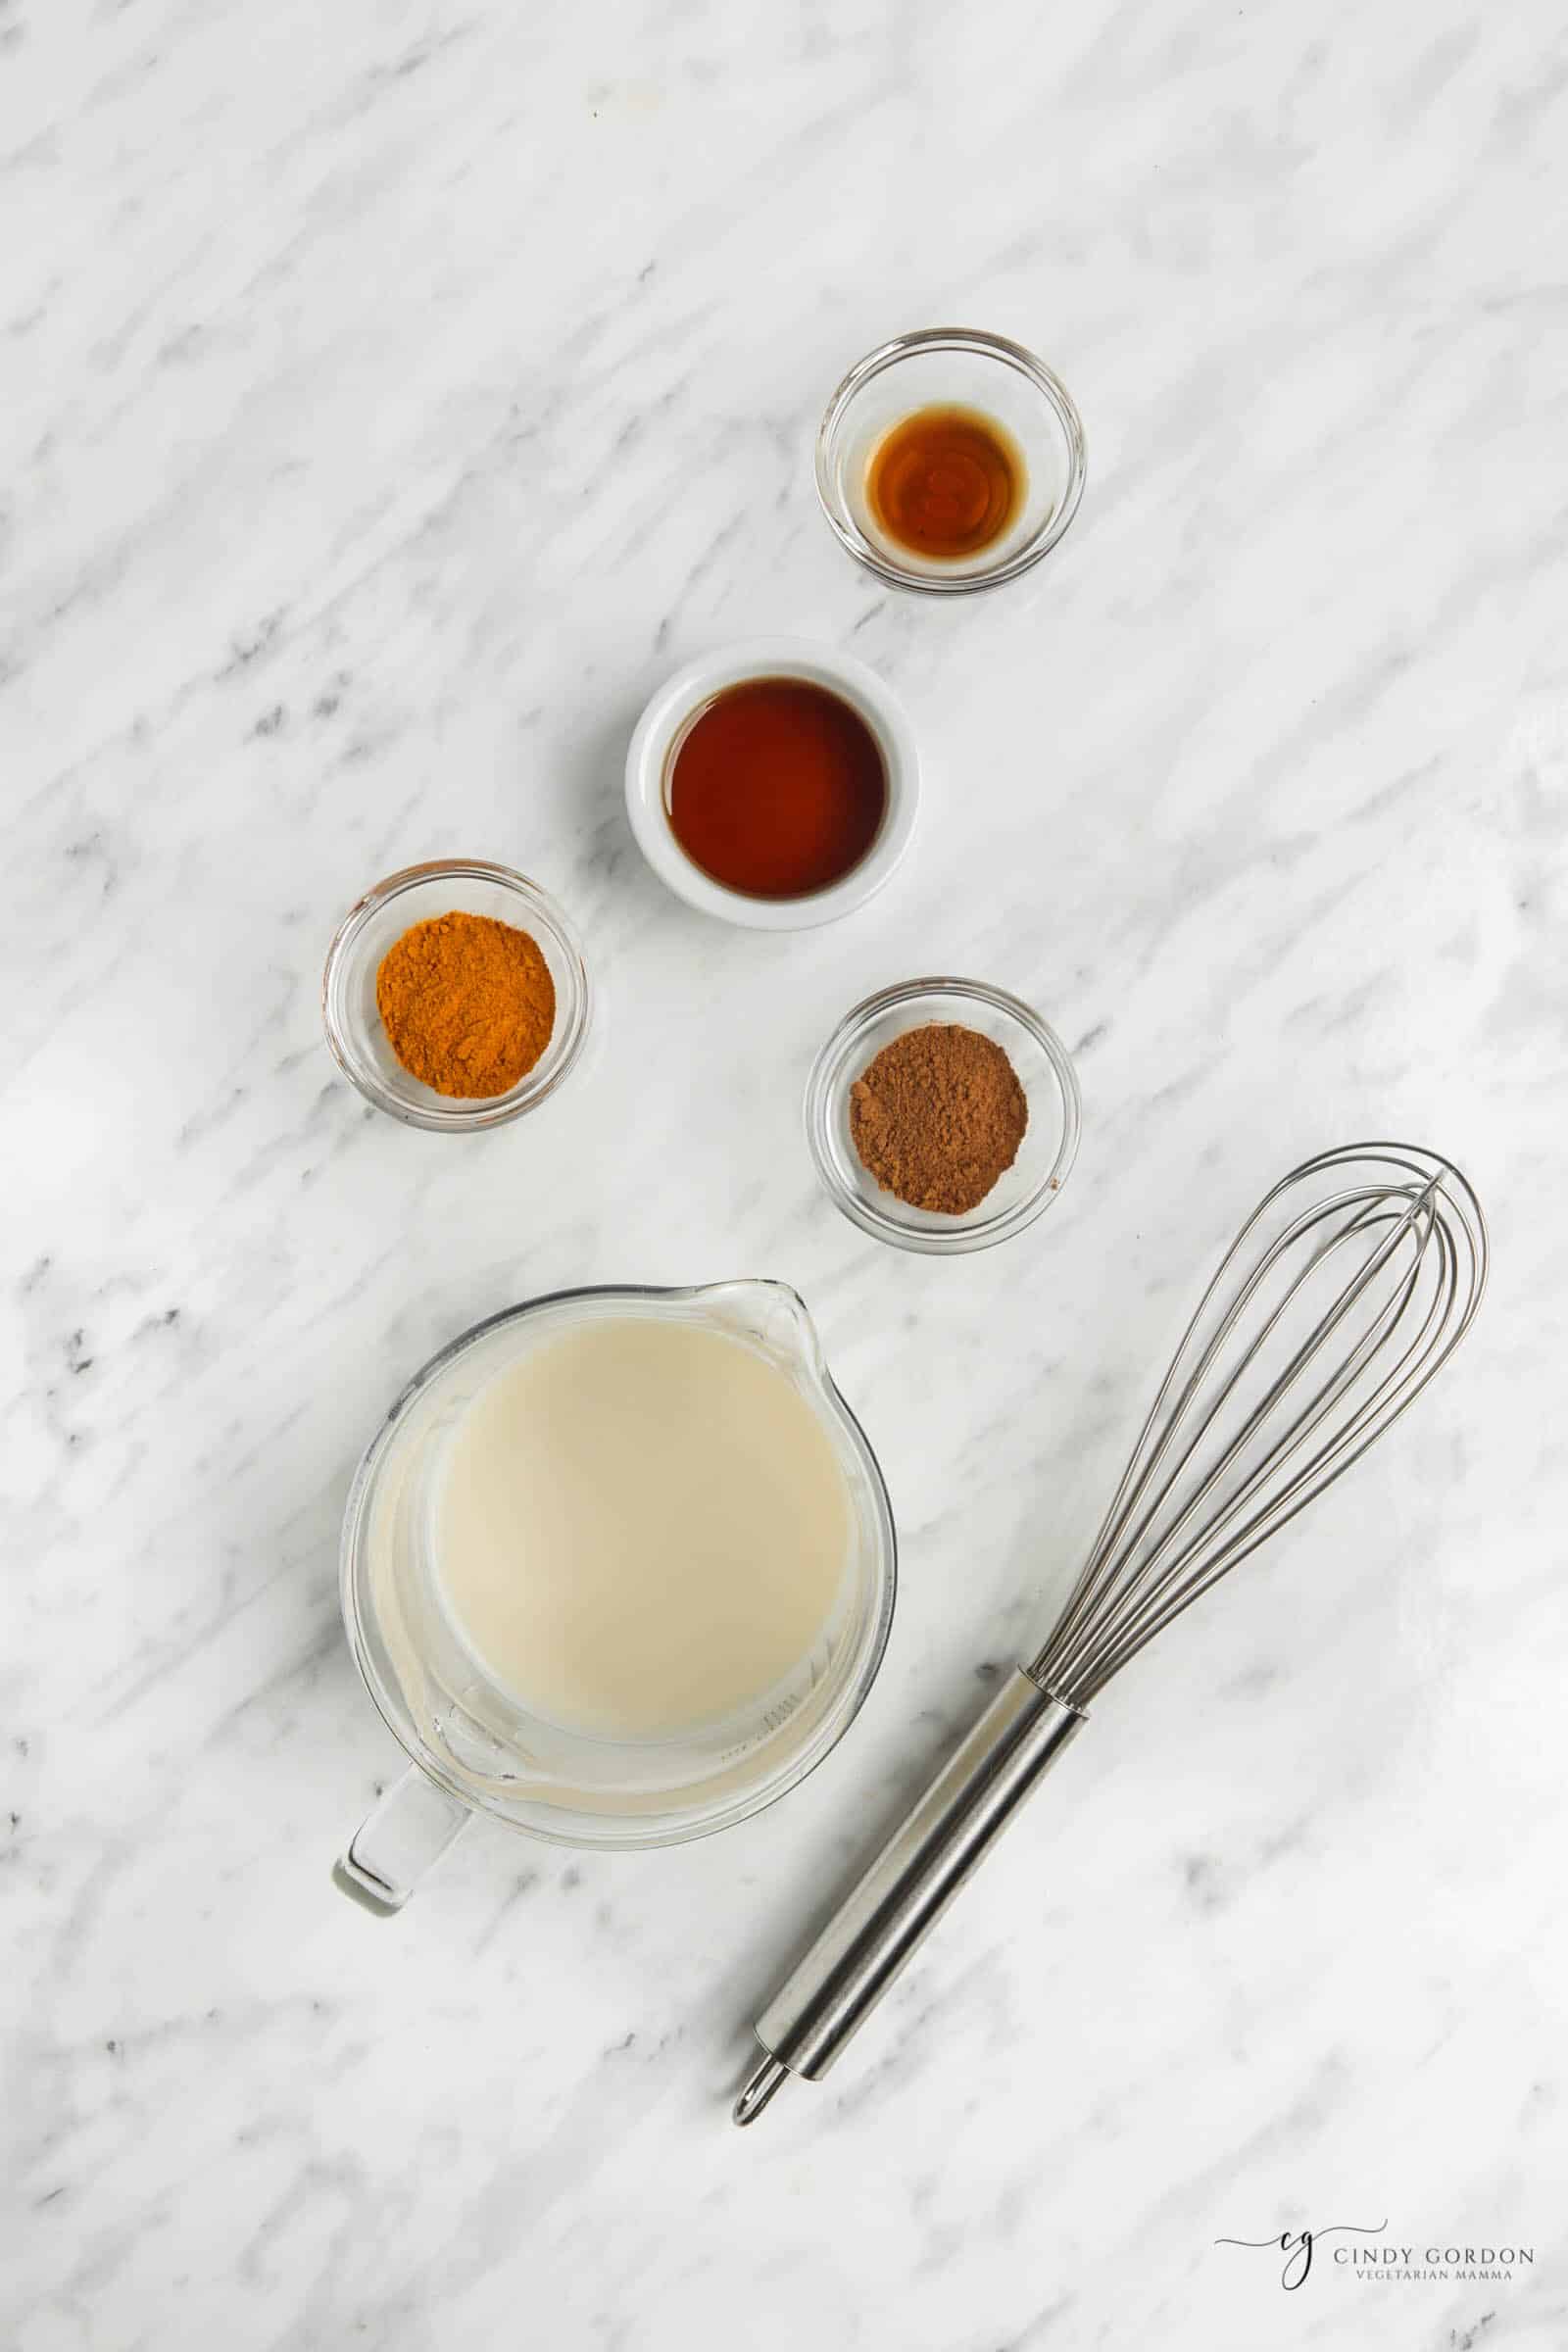 measured ingredients for turmeric latte. Ingredients are in clear and metal containers on a white marble background.